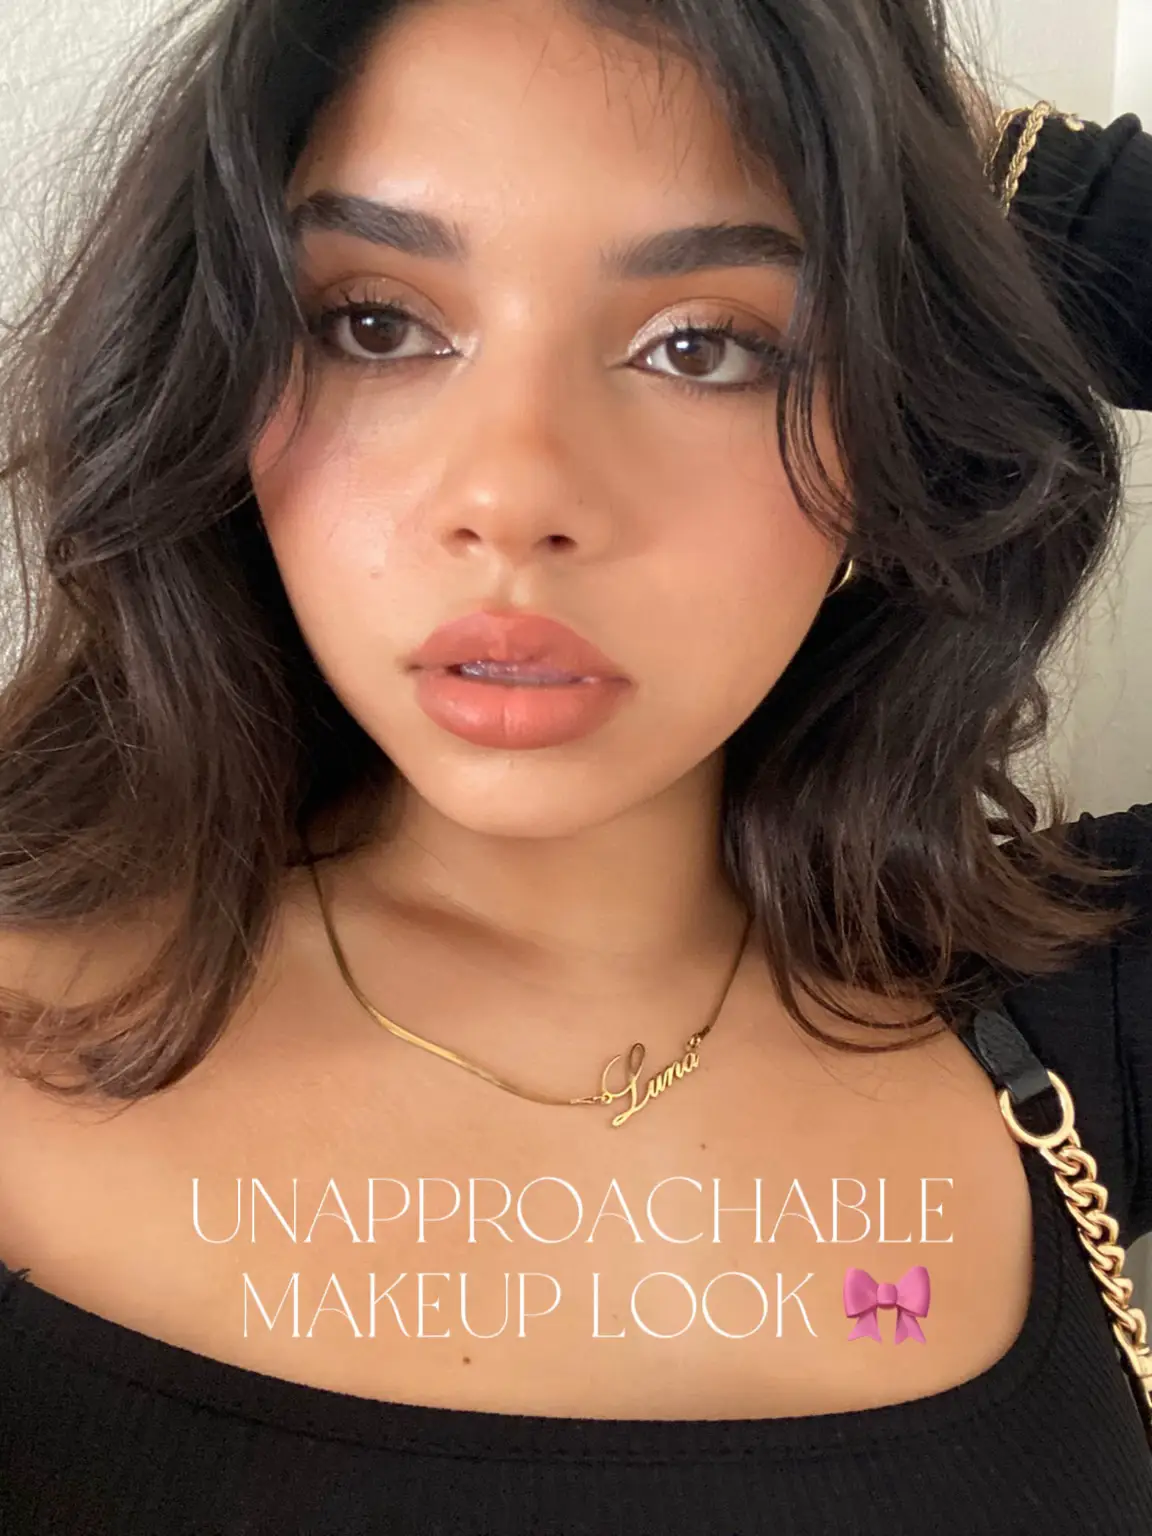 Unapproachable makeup is trending on TikTok – and looking at these